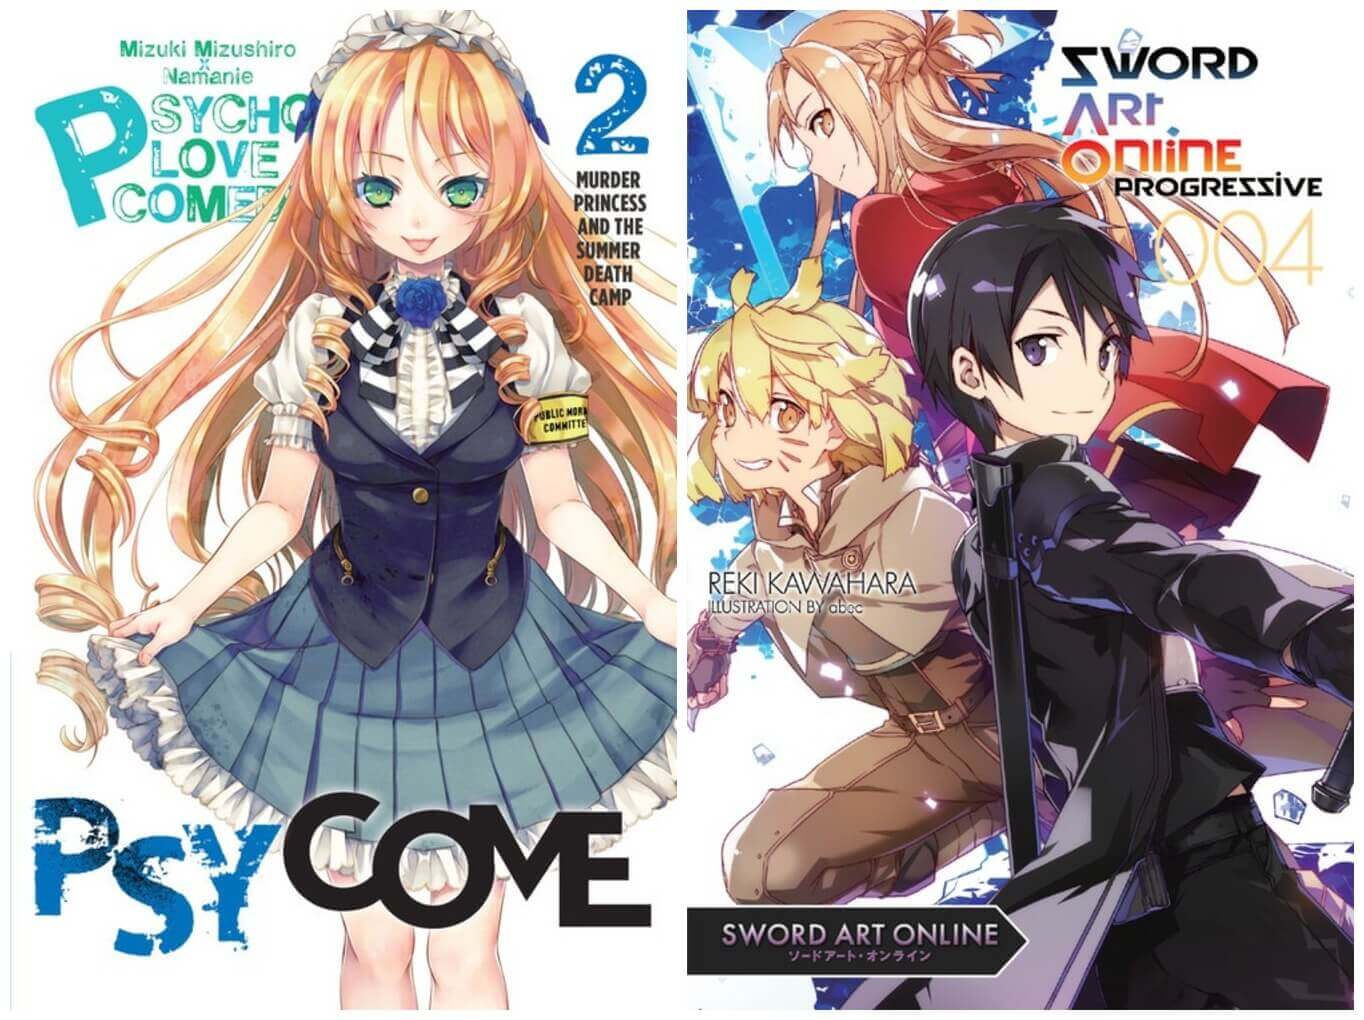 October 2016 Manga Releases Covers for Psycome and Sword Art Online Progressive.